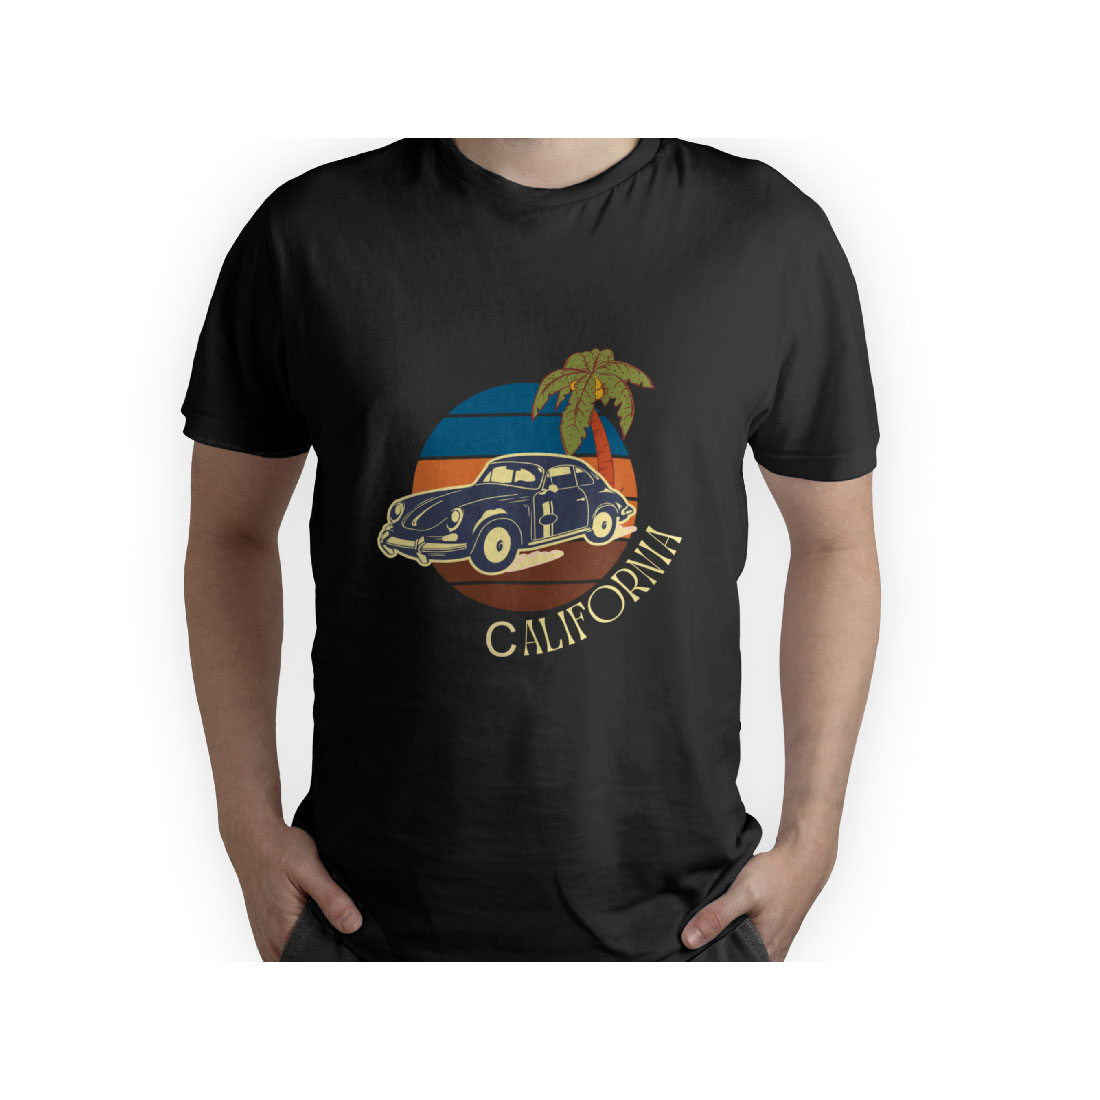 5 Vintage T-Shirt's Design Collection in Just $20, california on black design.